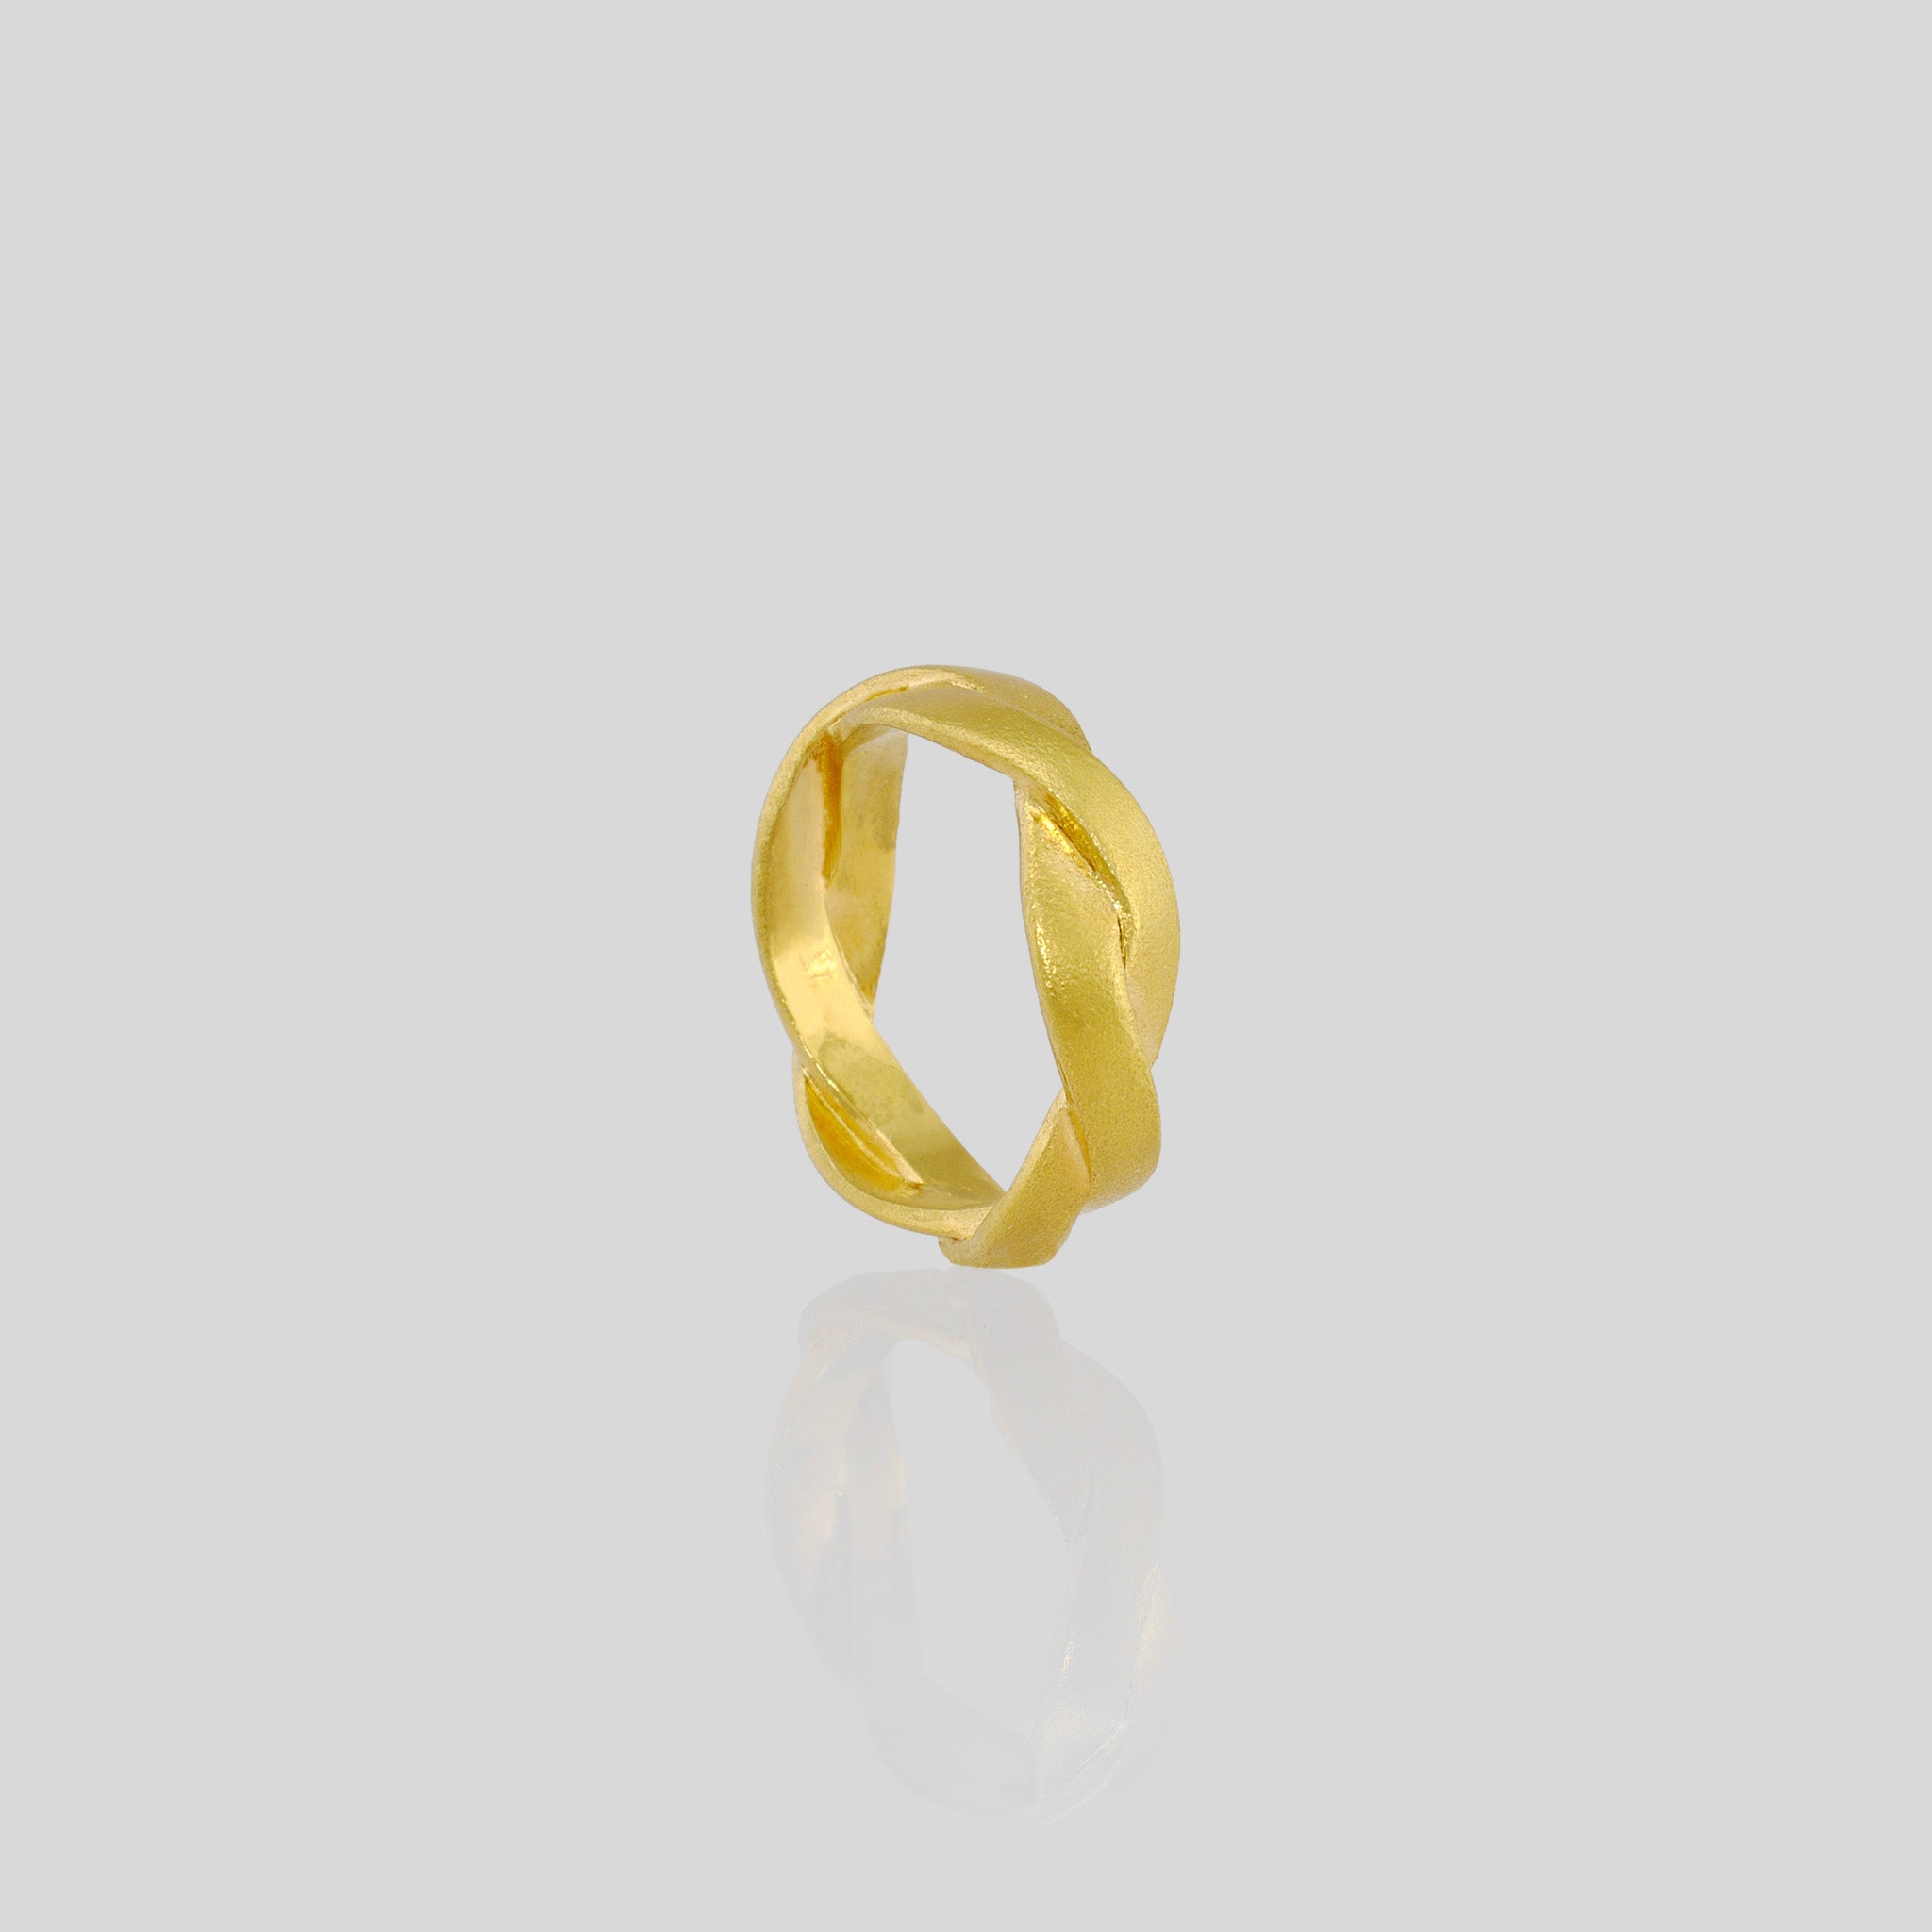 Hand-crafted ring made from Yellow Gold braids, offering an elegant and timeless touch to any attire. Intricately designed with subtle sophistication